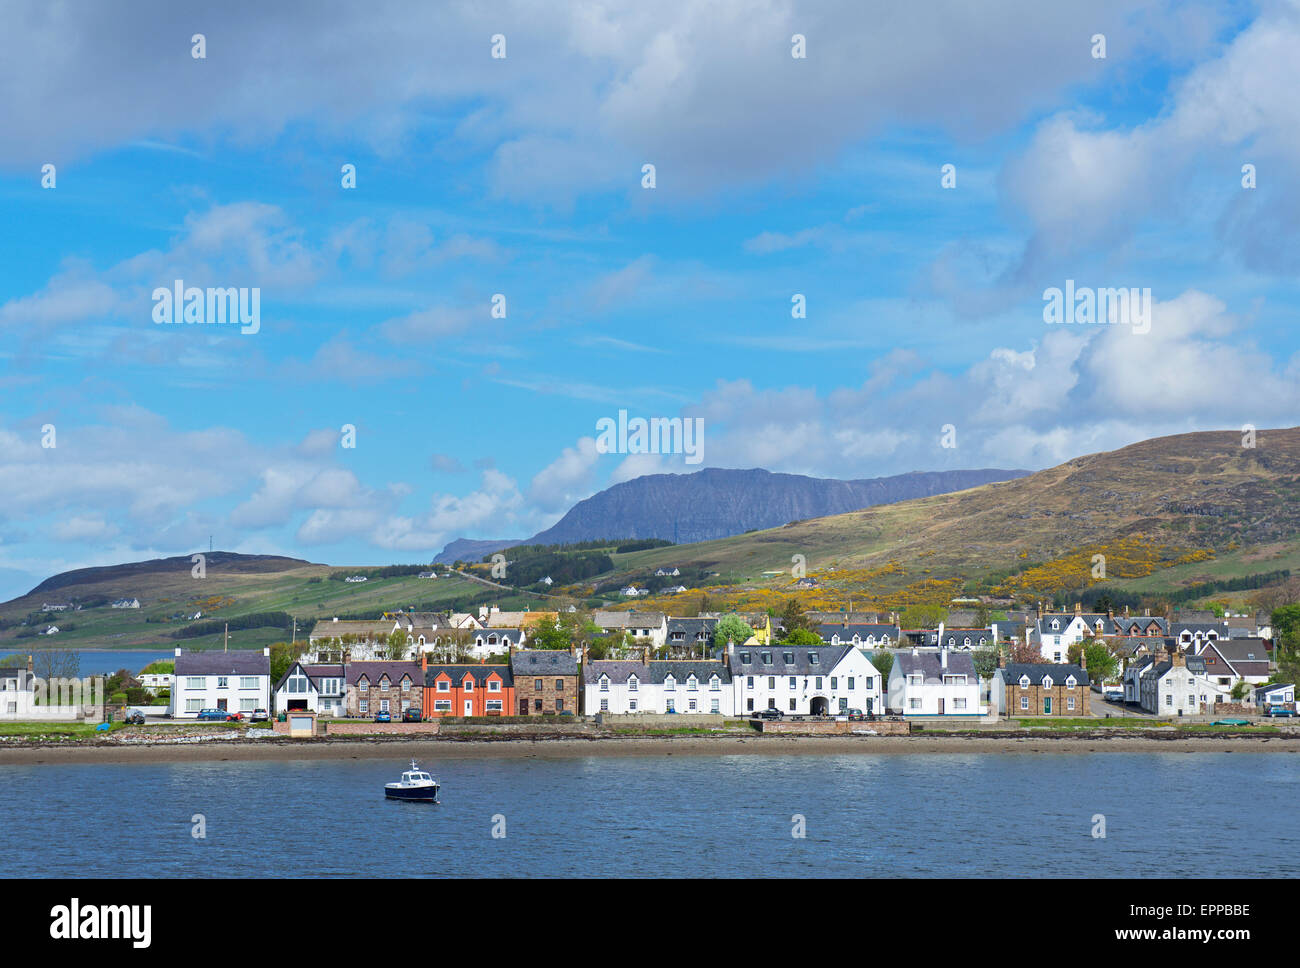 The port of Ullapool, Ross and Cromarty, Scotland UK Stock Photo